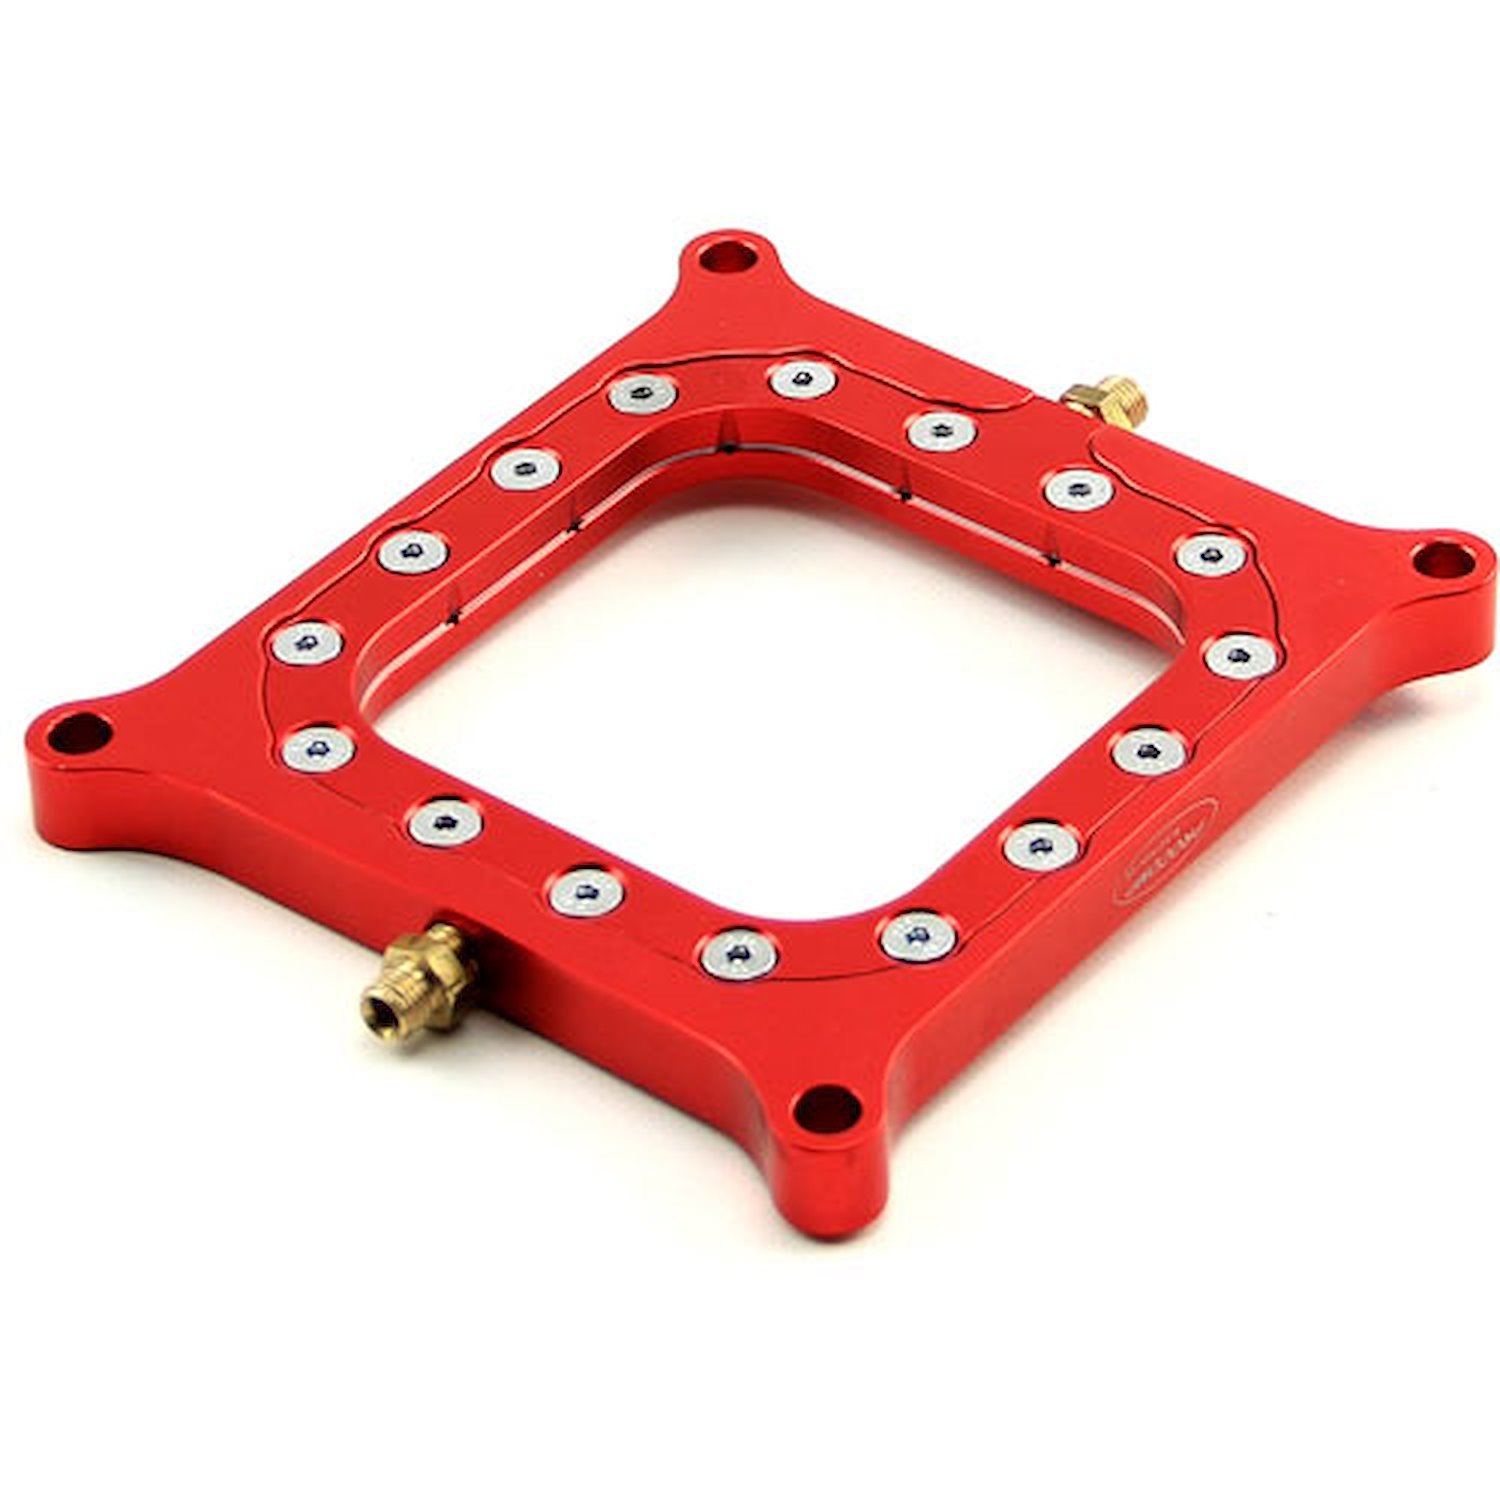 Nitrous Oxide 0.500 Red Billet Square Bore Preimeter Injection Spacer Plate